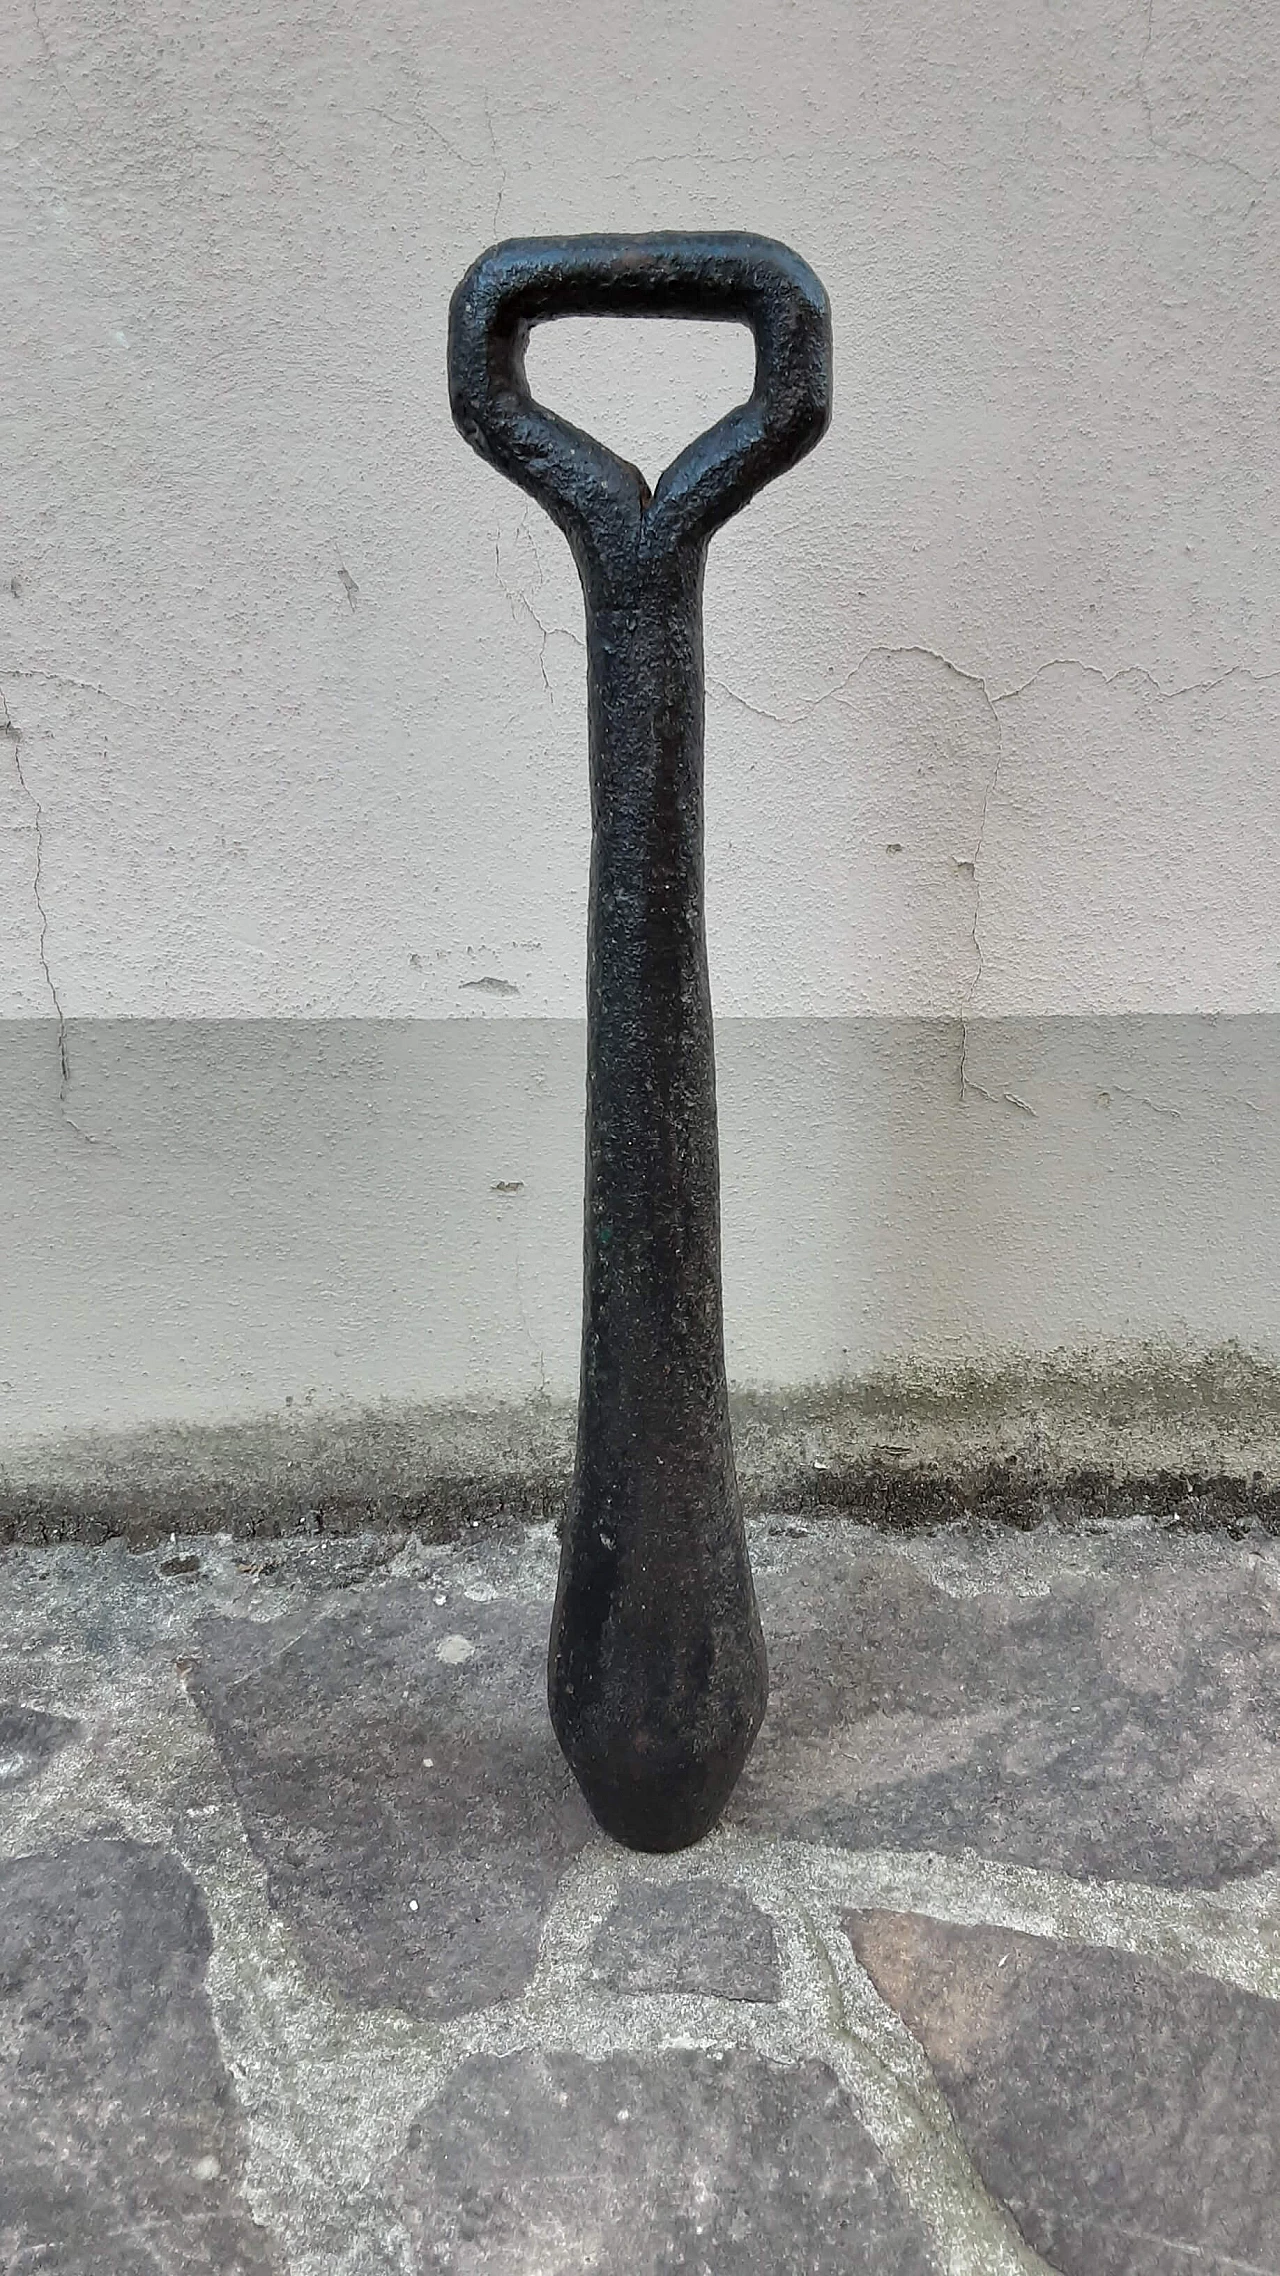 Black painted metal bell clapper, 17th century 1